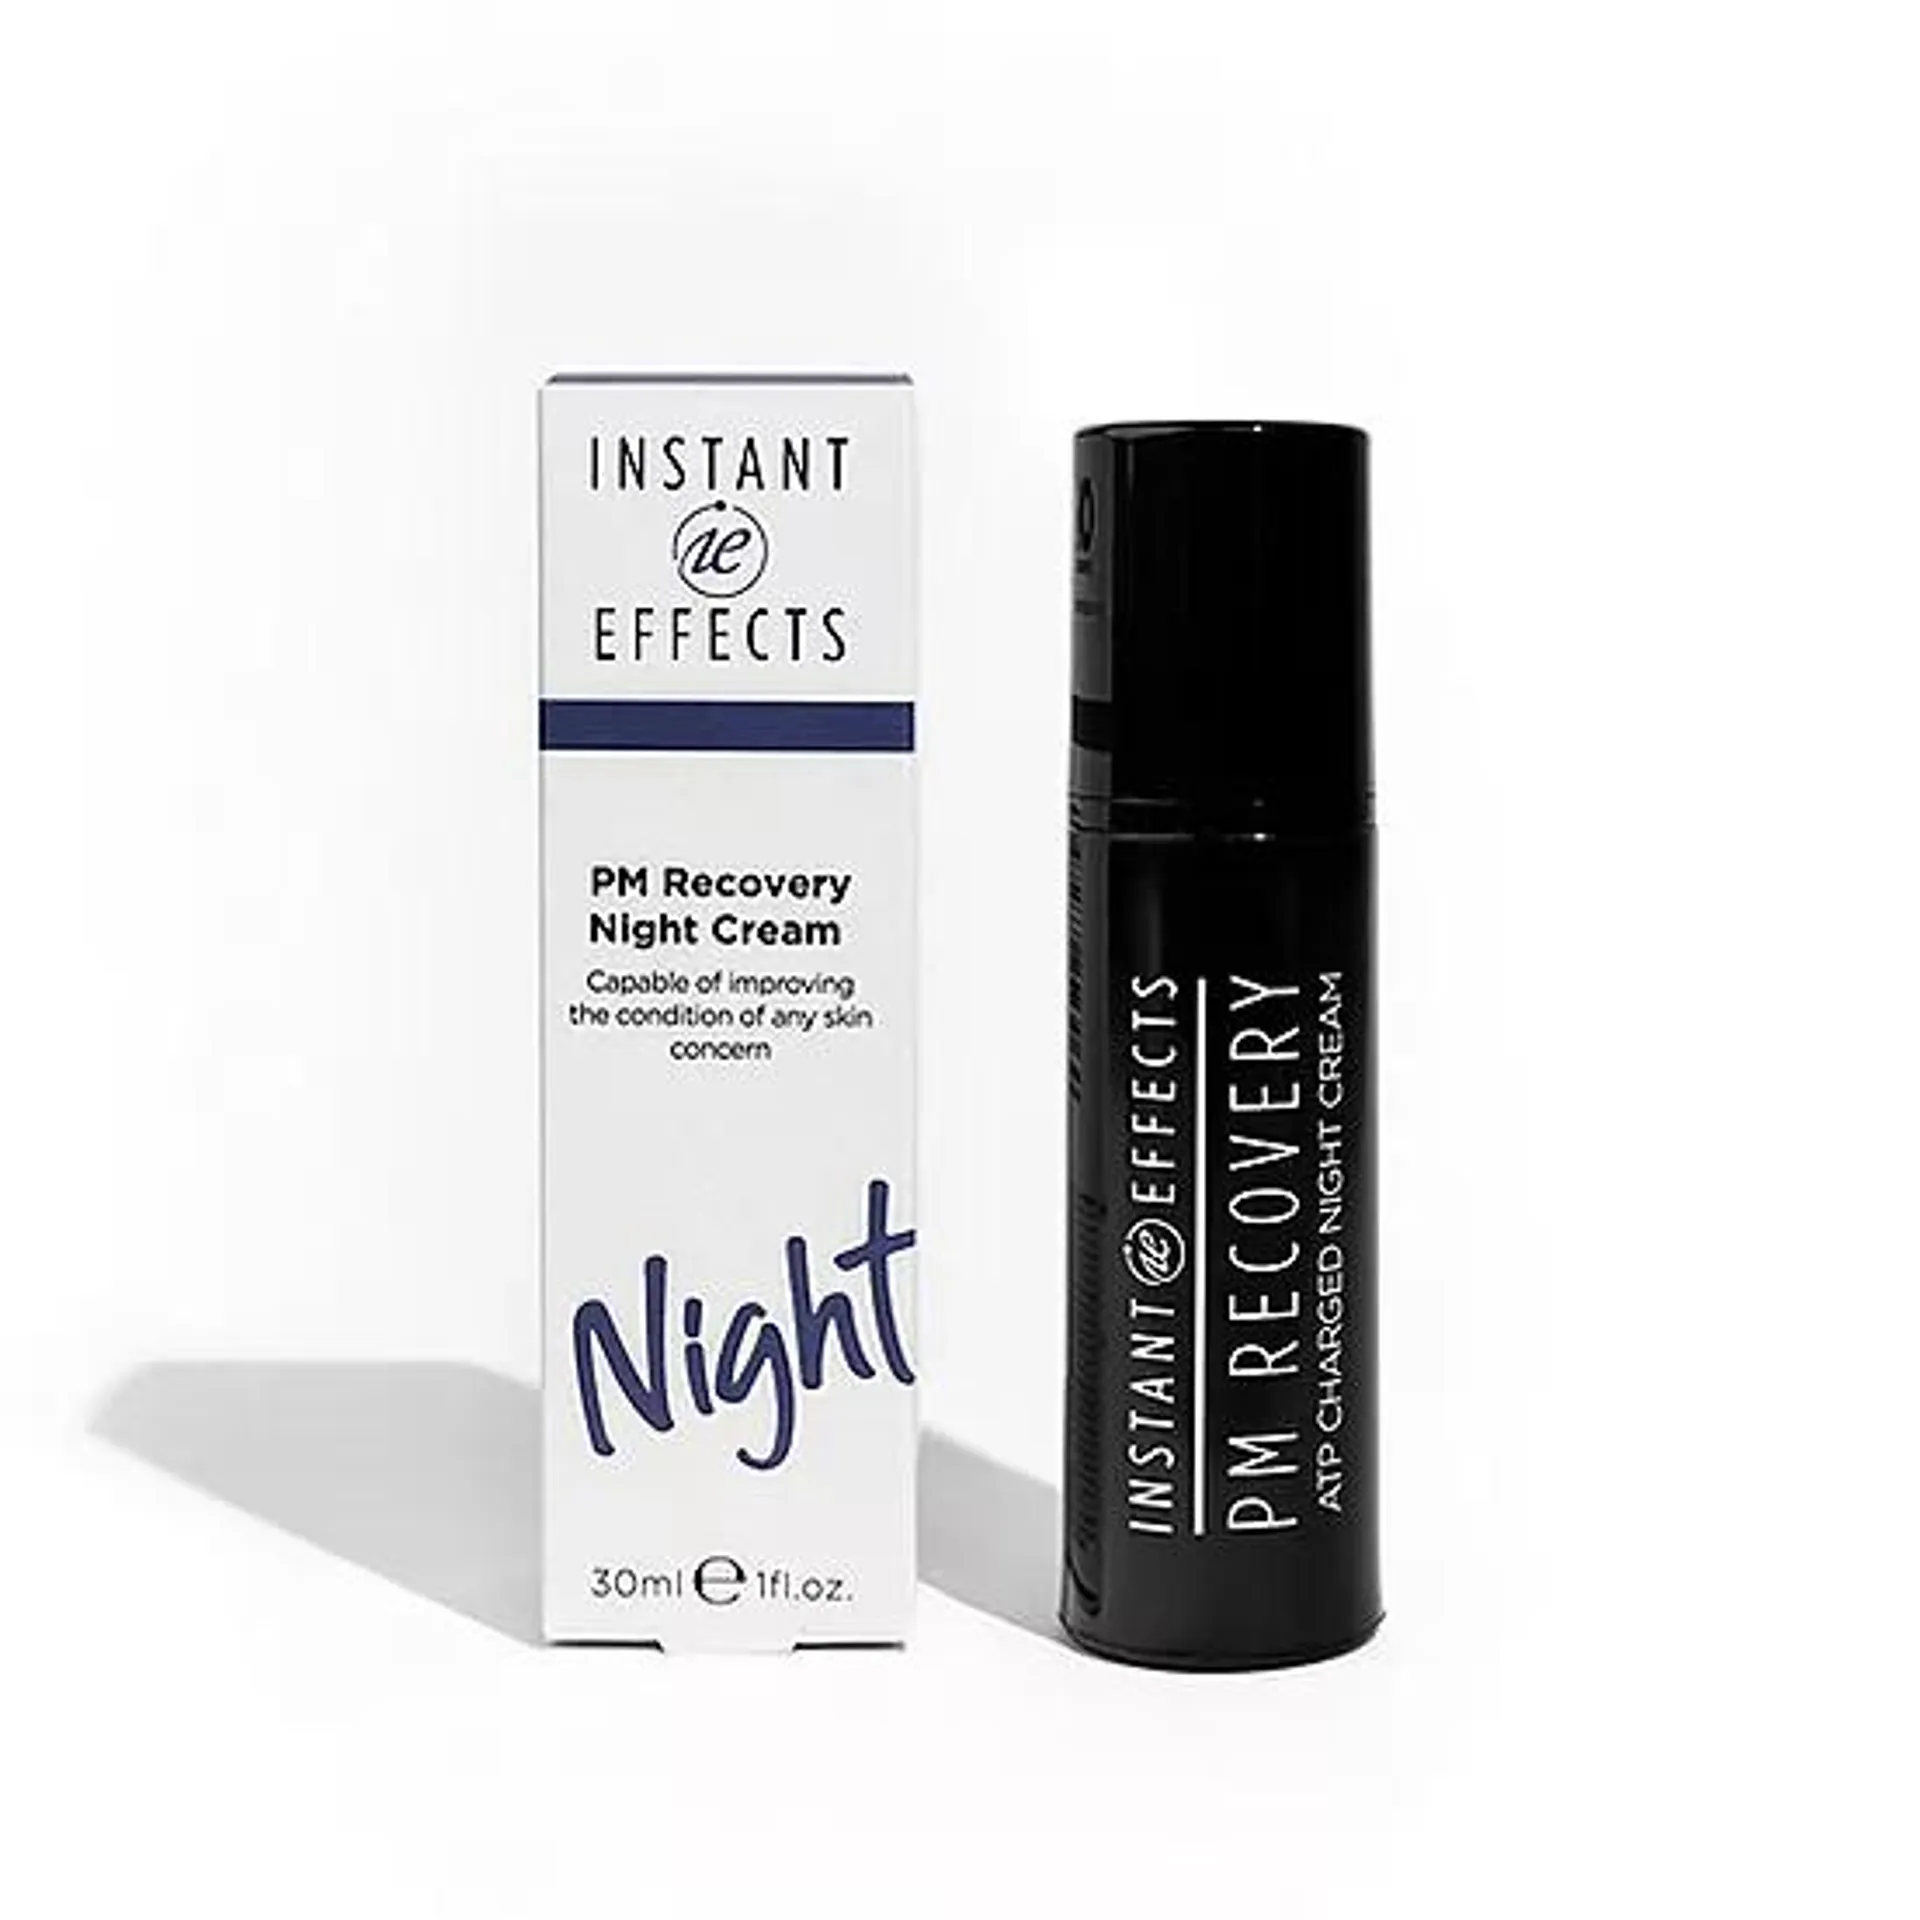 Instant Effects PM Recovery Night Cream